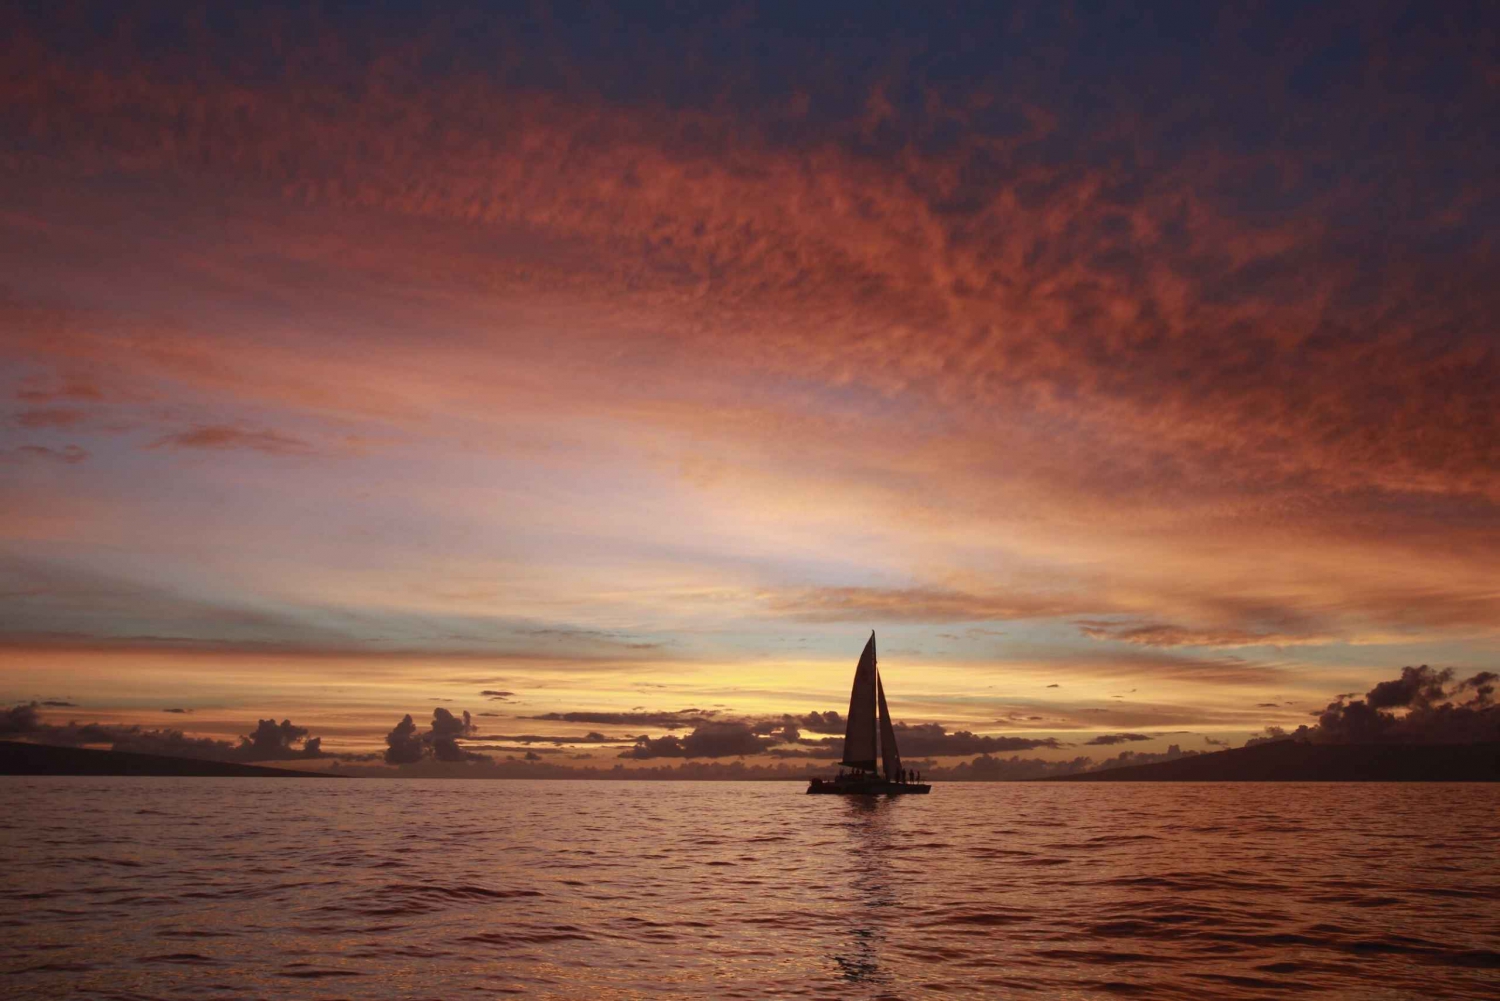 Maui: Deluxe Sunset Sail from Lahaina